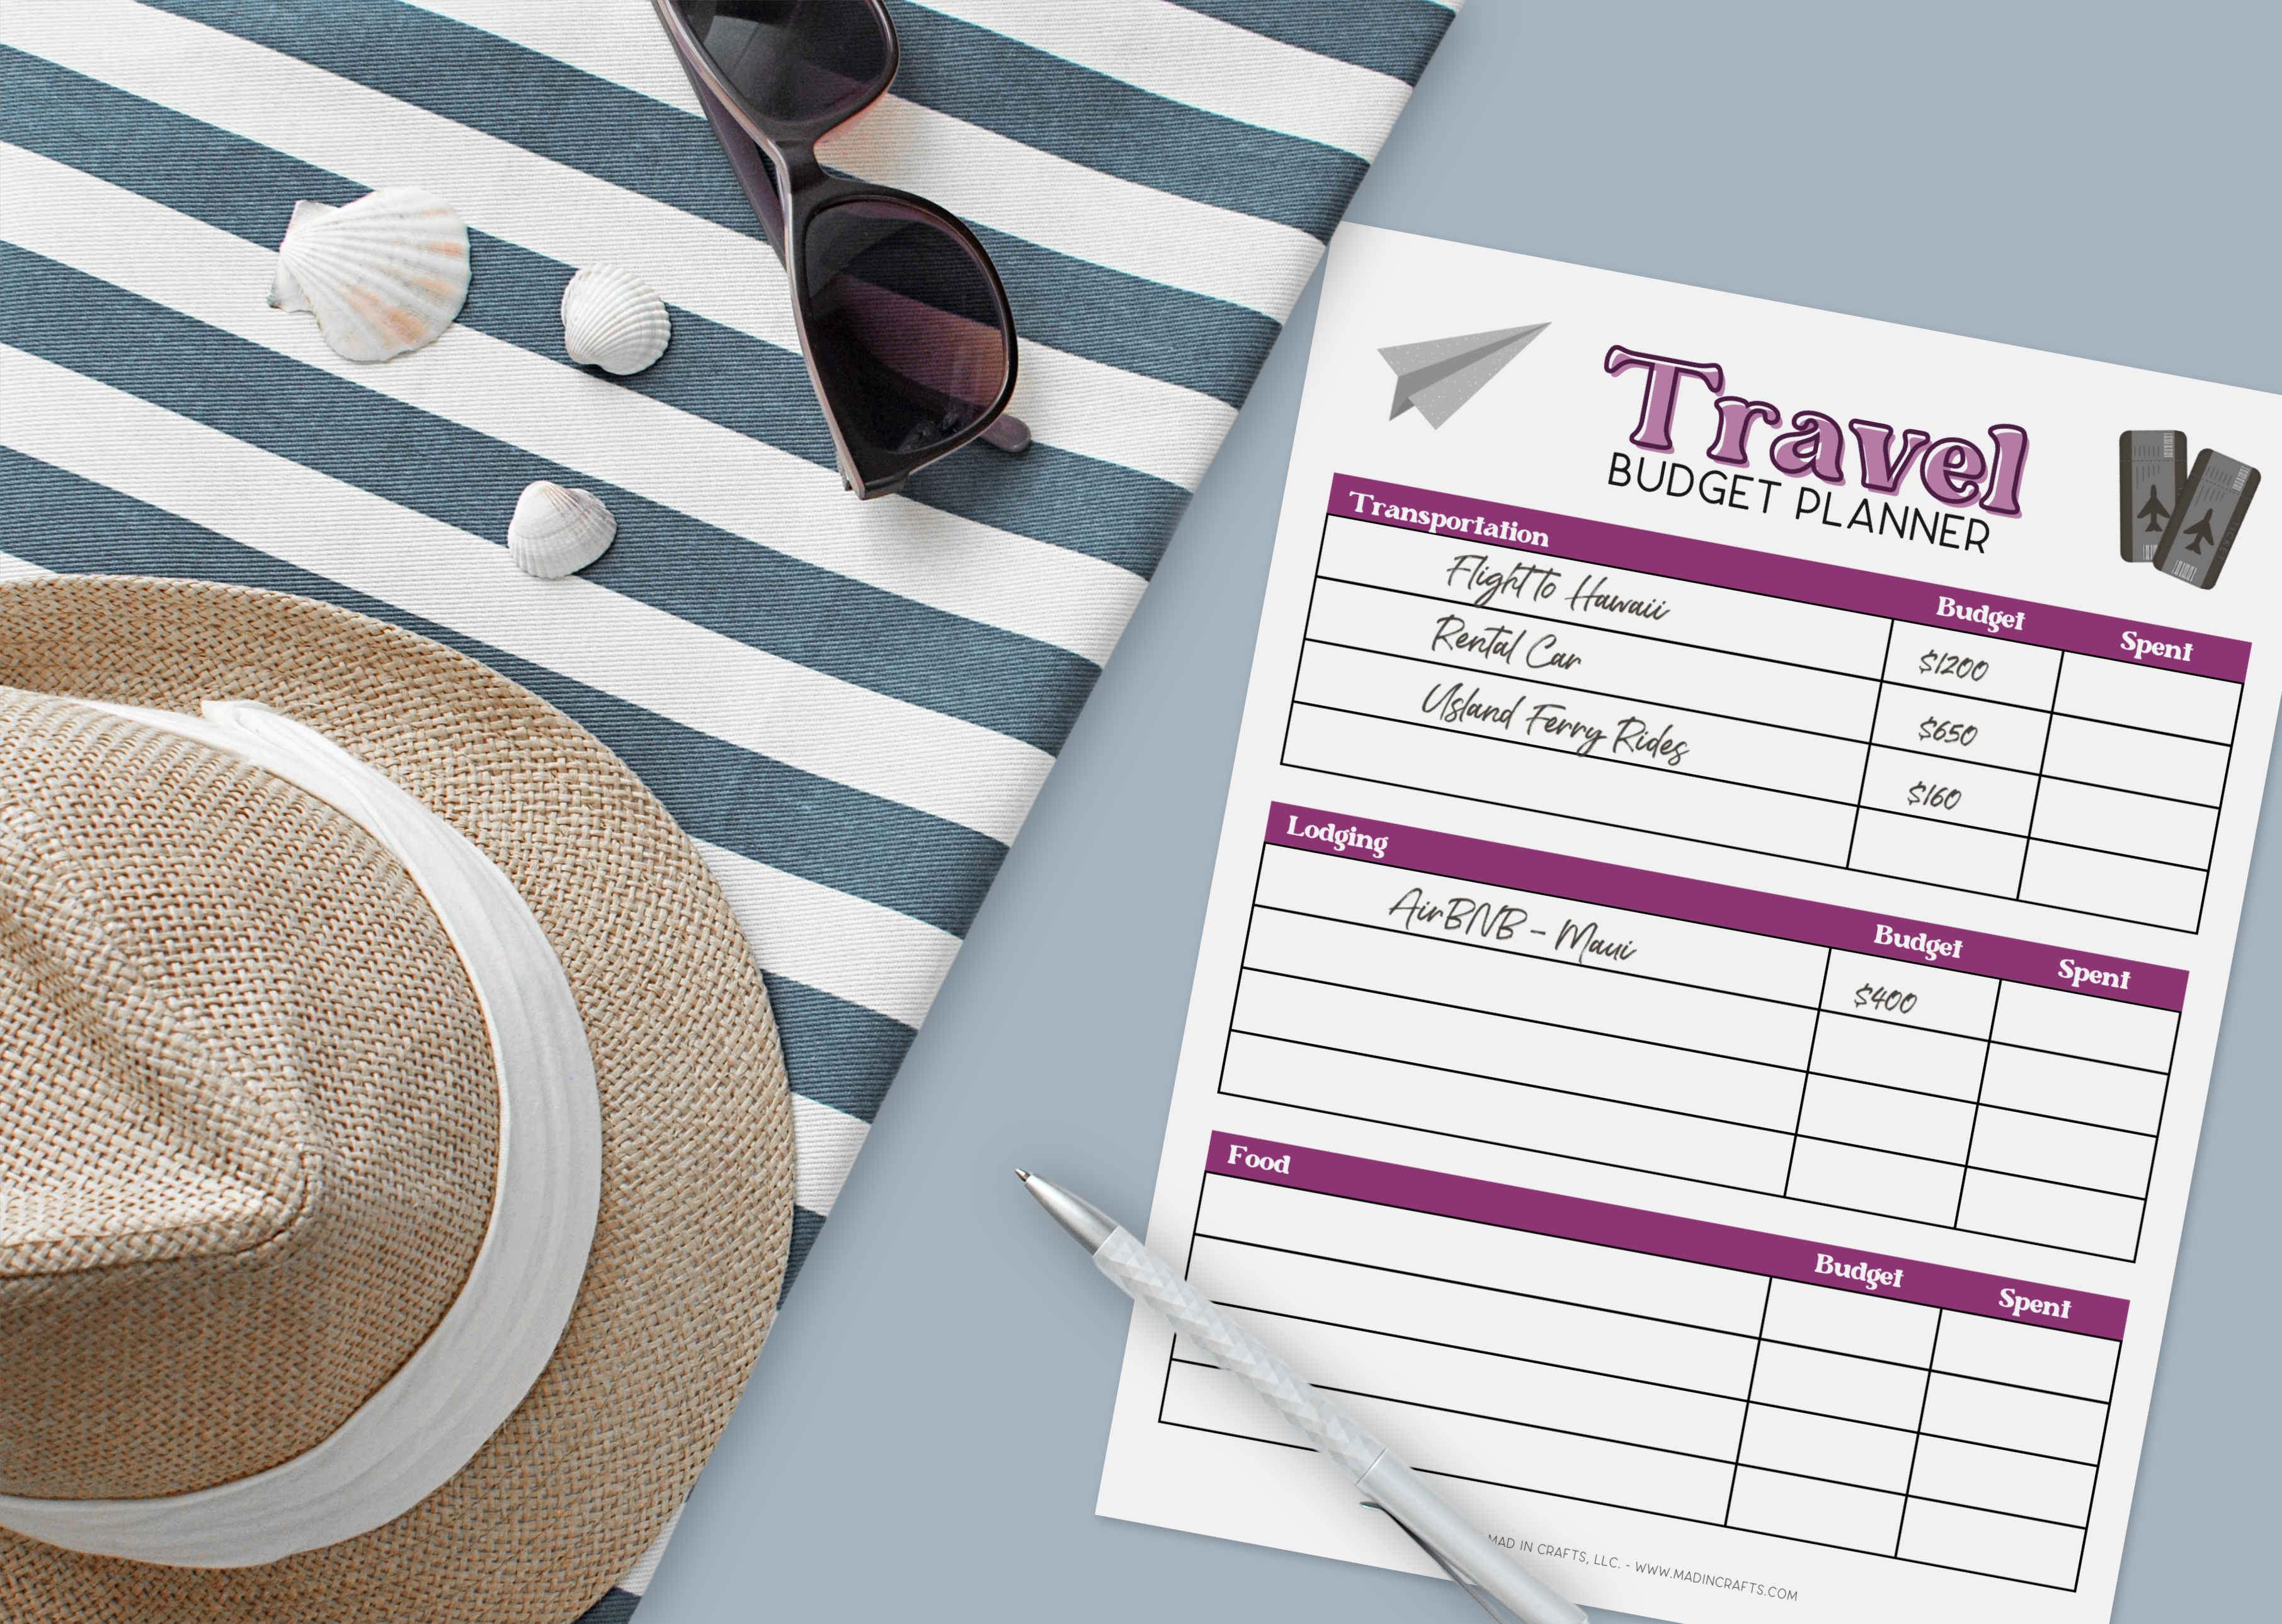 filled out printable travel budget worksheet on a blue background near a beach towel, hat, and sunglasses